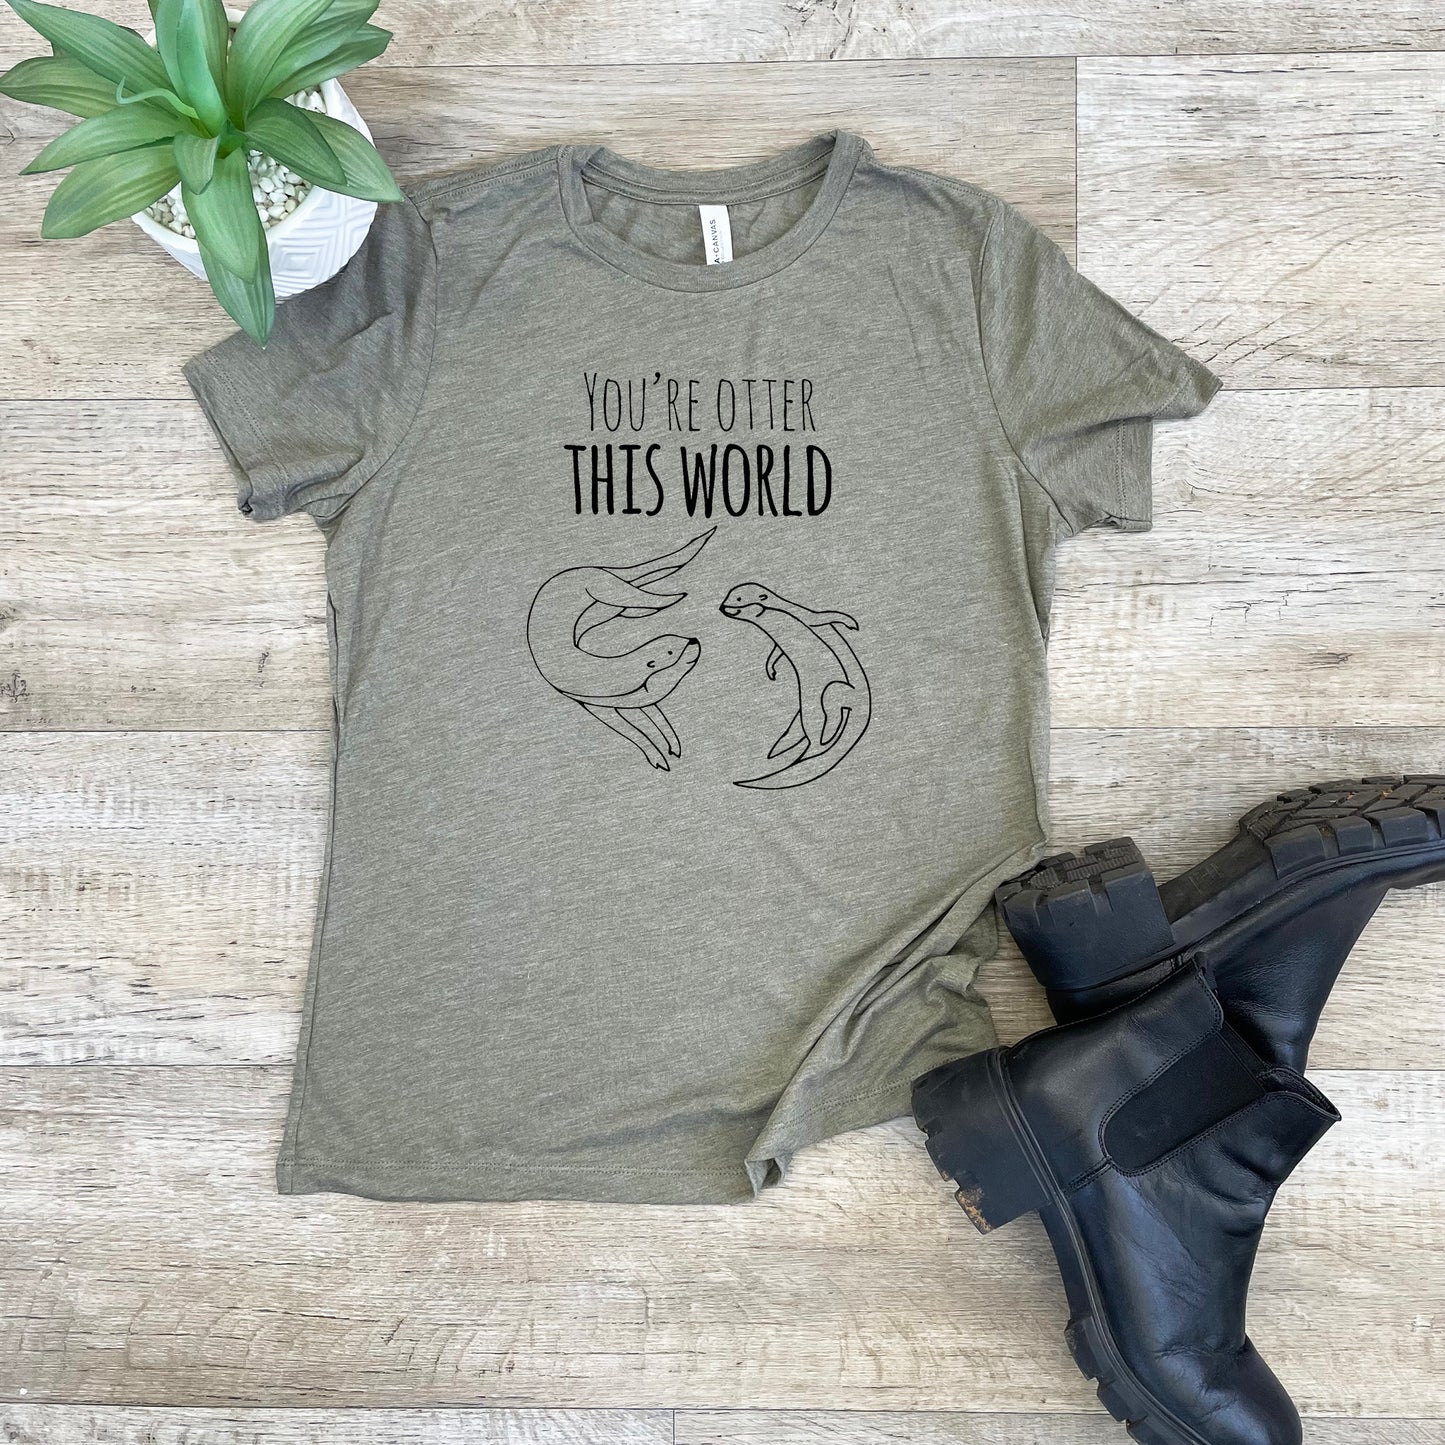 You're Otter This World - Women's Crew Tee - Olive or Dusty Blue